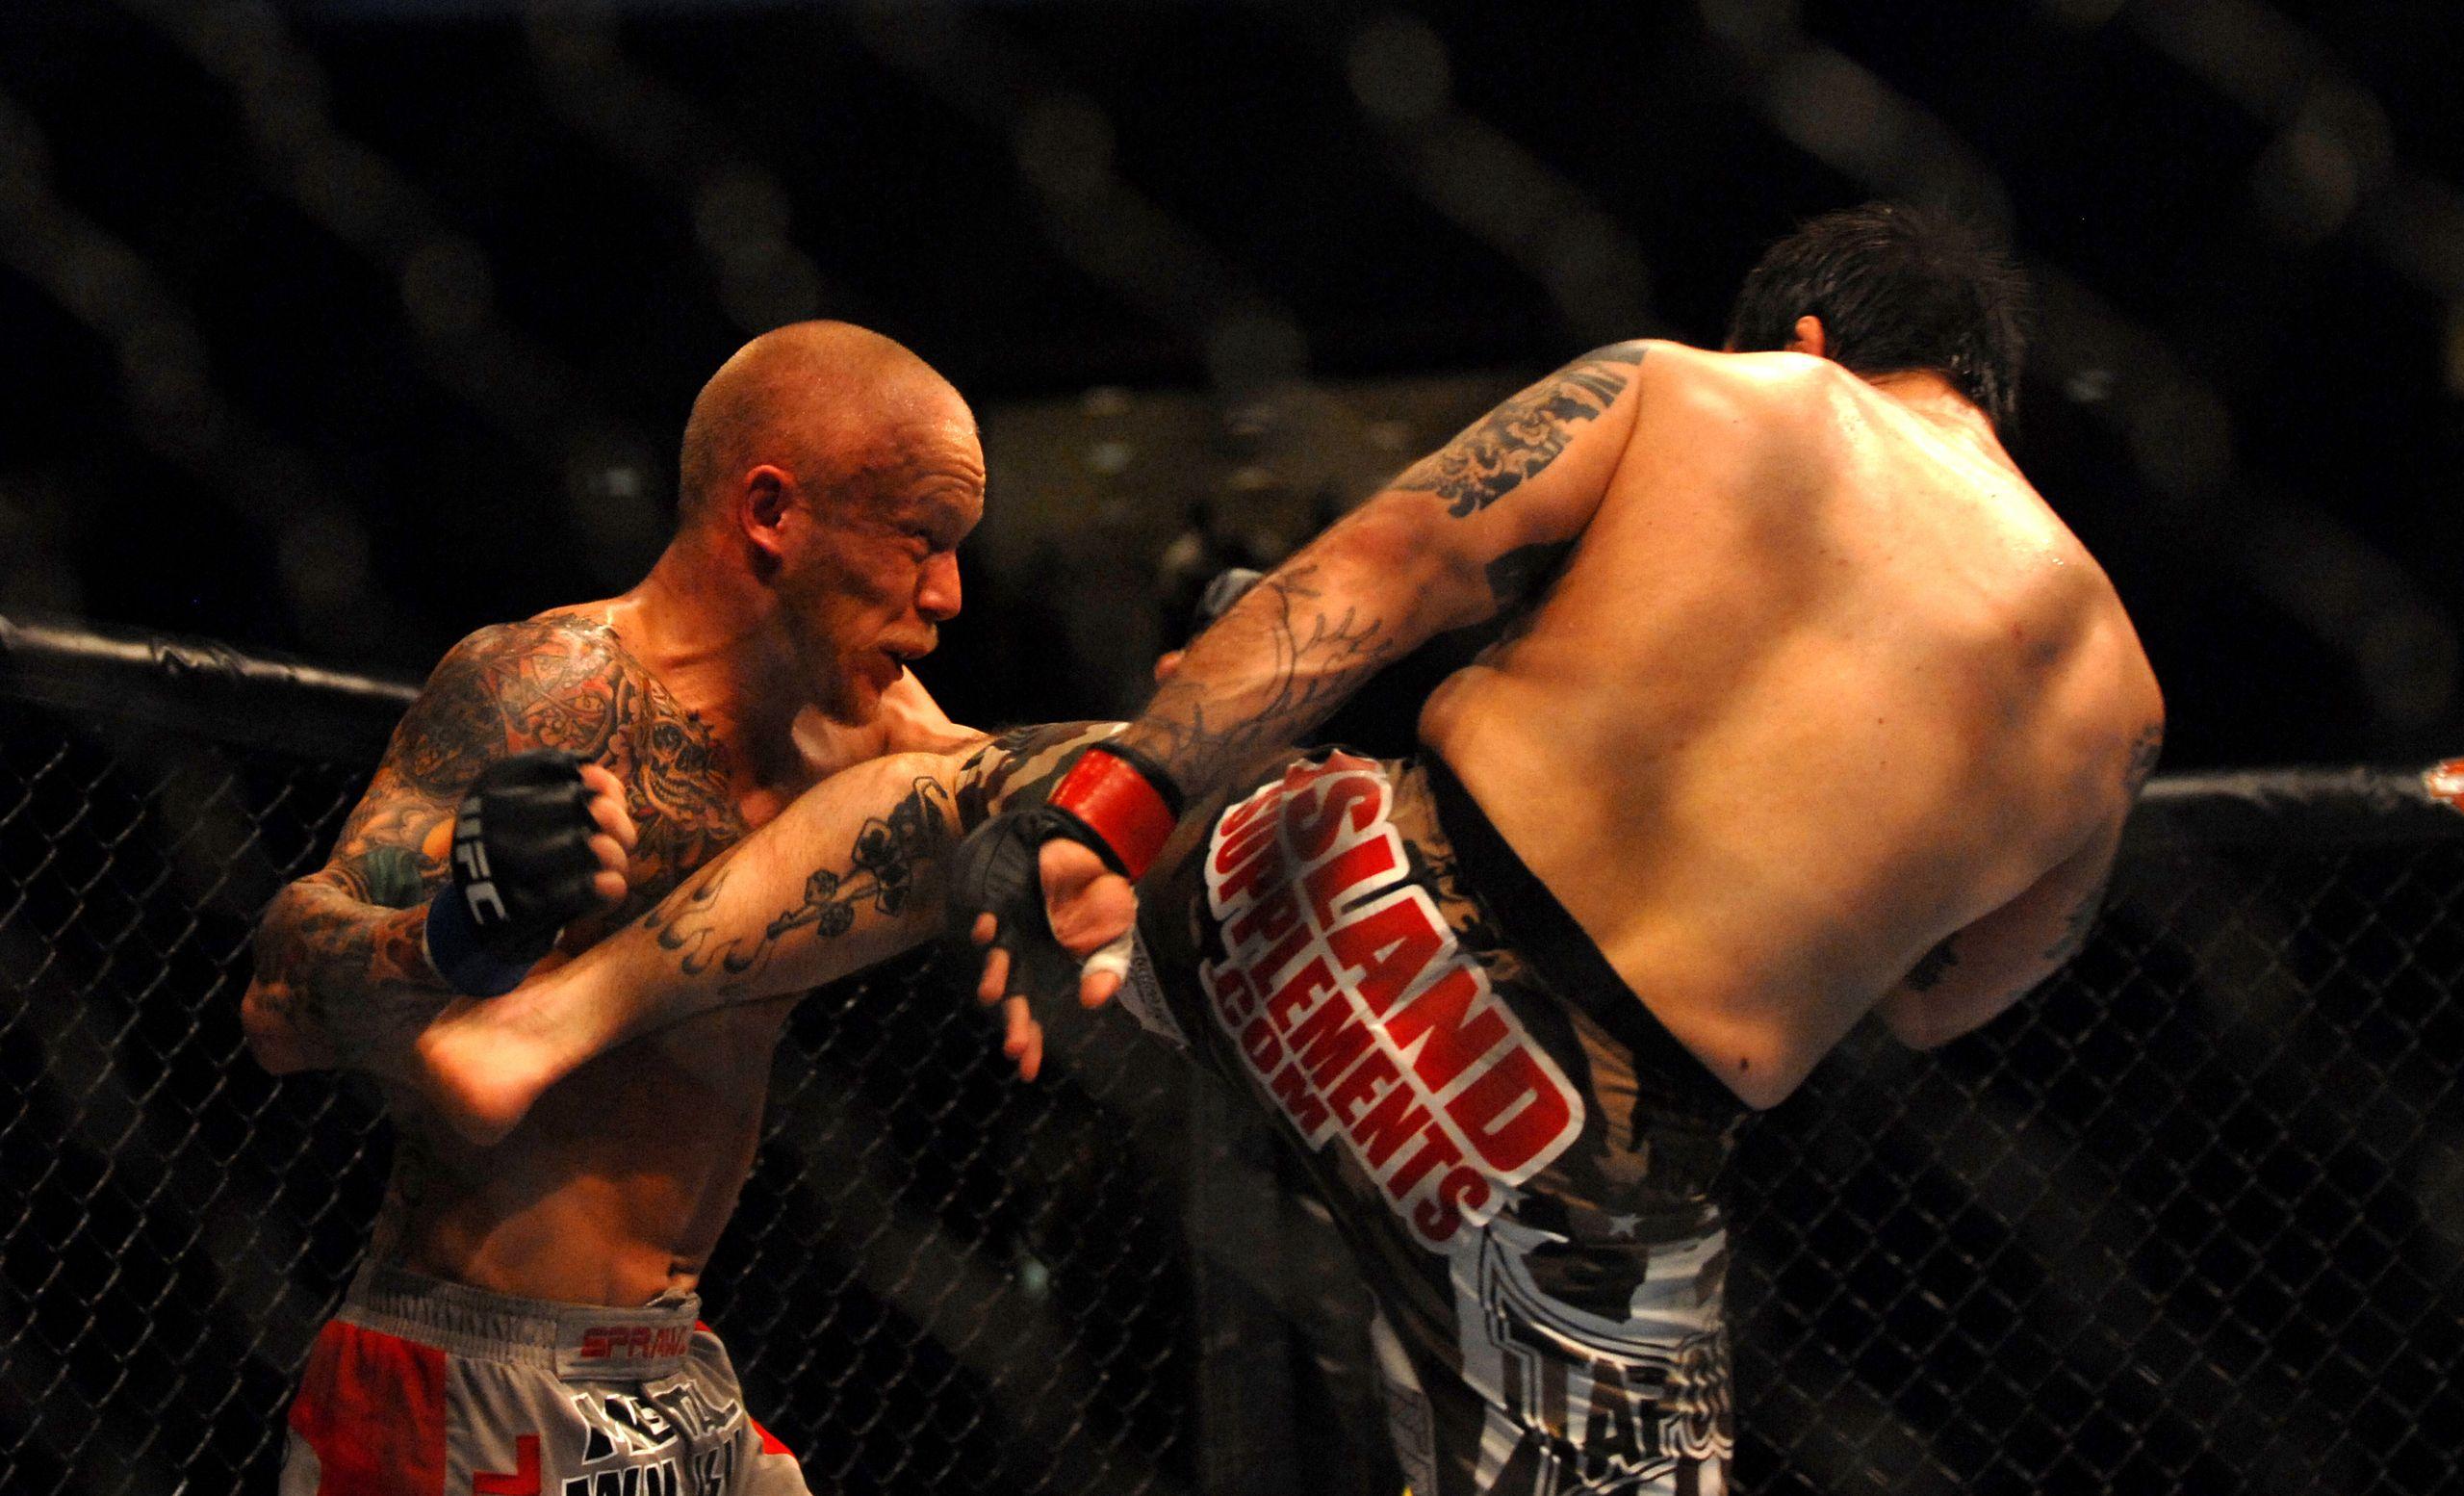 The Ultimate Fighter image UFC at Ft. Bragg HD wallpaper